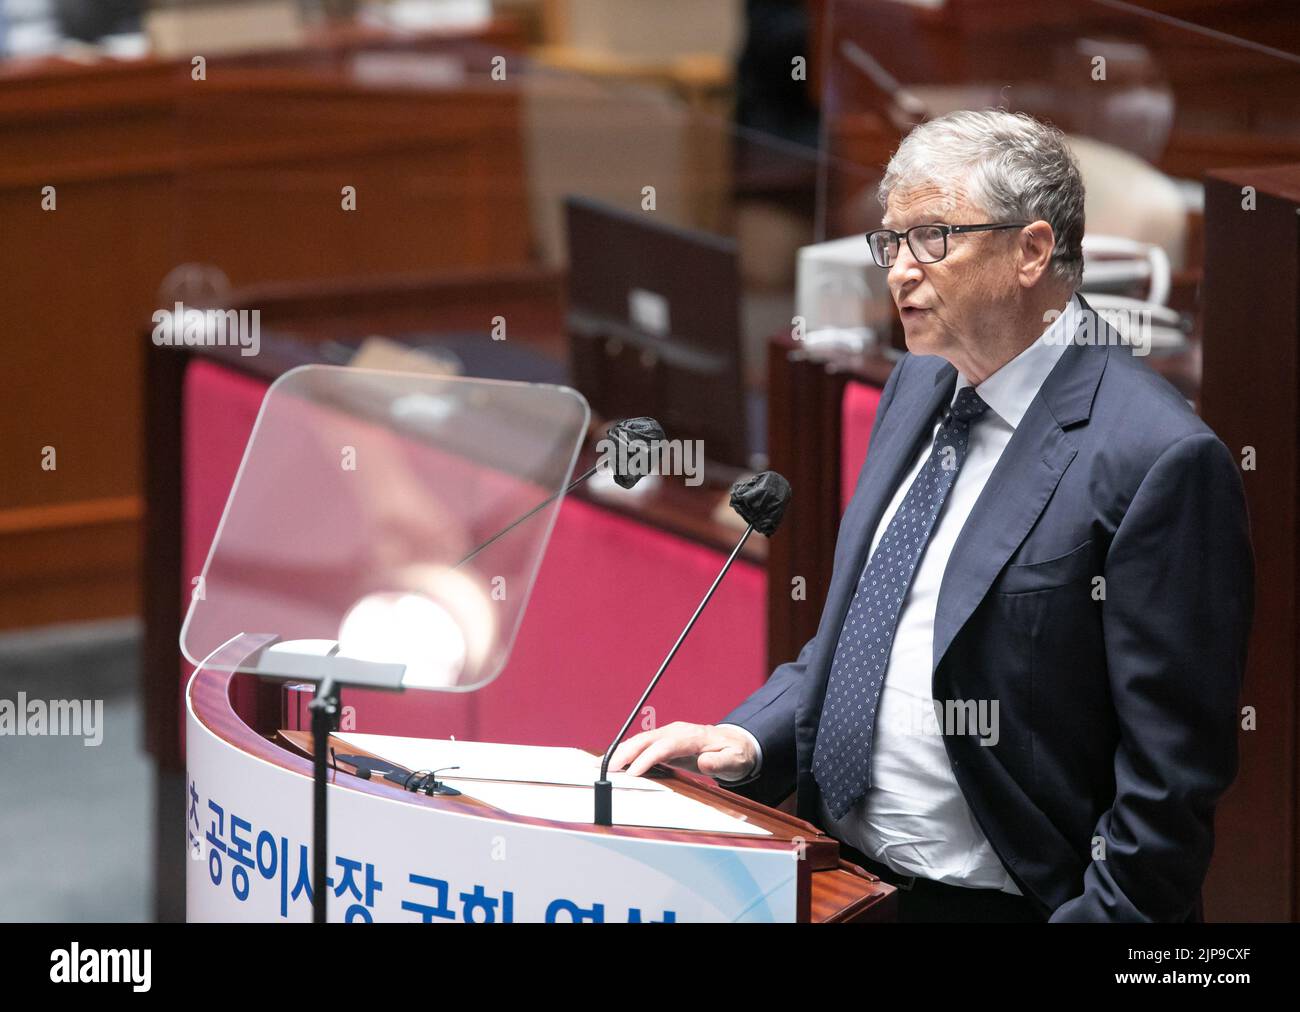 Bill Gates, co-chairman of the Bill and Melinda Gates Foundation, makes an address at the National Assembly in Seoul, South Korea, on Tuesday, Aug. 16, 2022. Gates spoke about the importance of global health cooperation to end infectious diseases like Covid-19. (Photographer: Lee Yong-ho/Pool/Sipa USA) Stock Photo